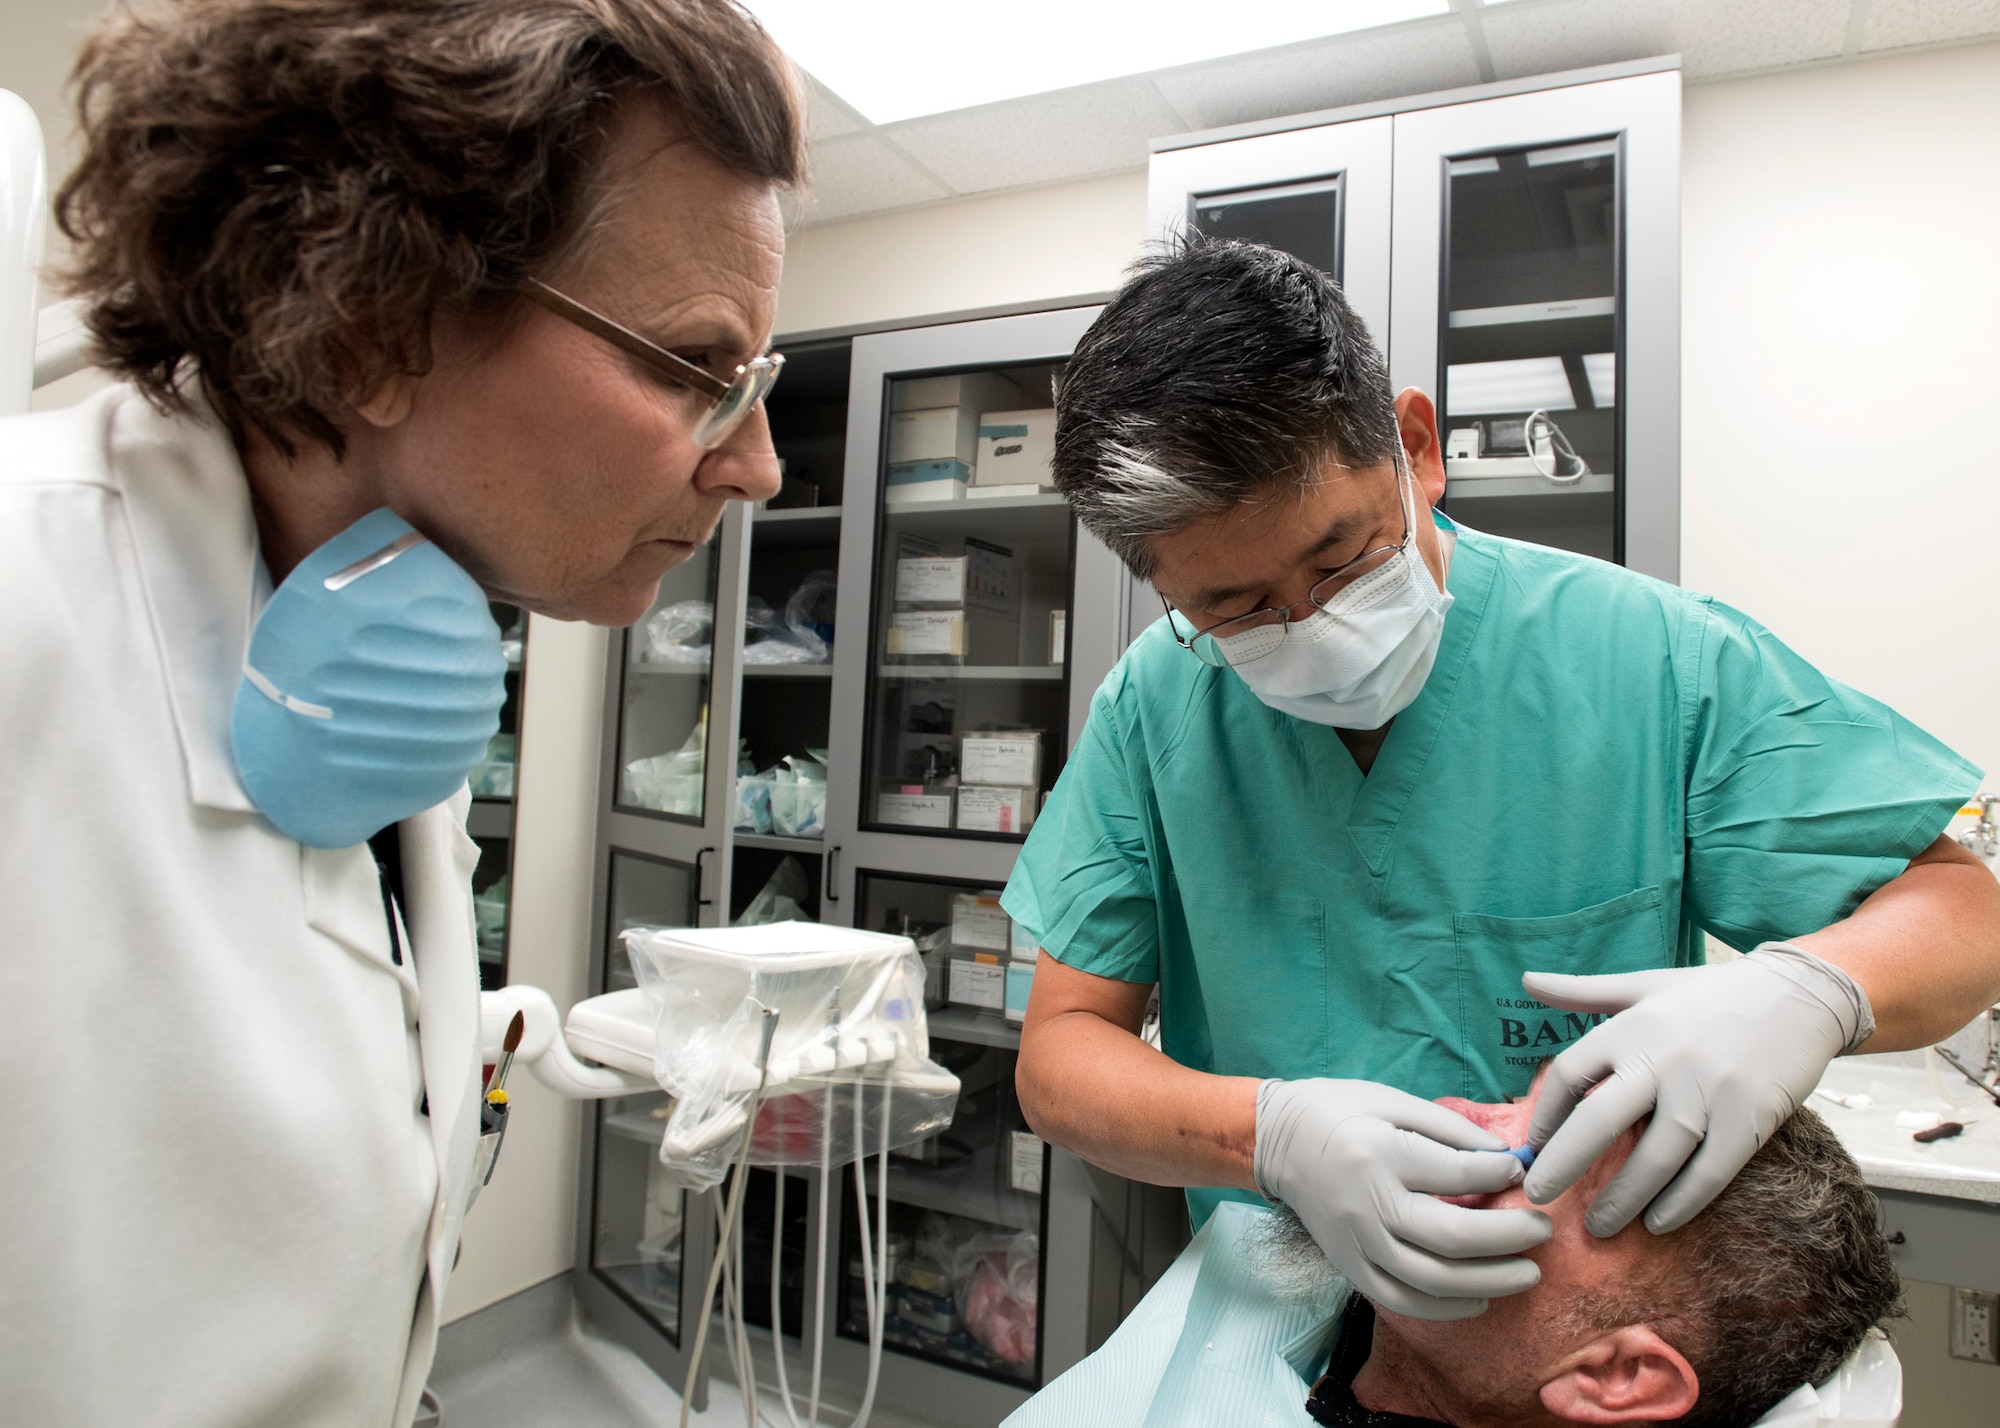 Ms. Nancy Hansen (left), 59th Dental Training Squadron anaplastologist, and Lt. Col (Dr.) Young J. Honnlee, 59th Medical Wing maxillofacial prosthodontics fellow, inspect a patient’s eye socket at San Antonio Military Medical Center, Joint Base San Antonio-Fort Sam Houston, Texas. Hansen and Honnlee work together in creating a prosthetic eye for the patient. (U.S. Air Force photo by Staff Sgt. Kevin Iinuma)